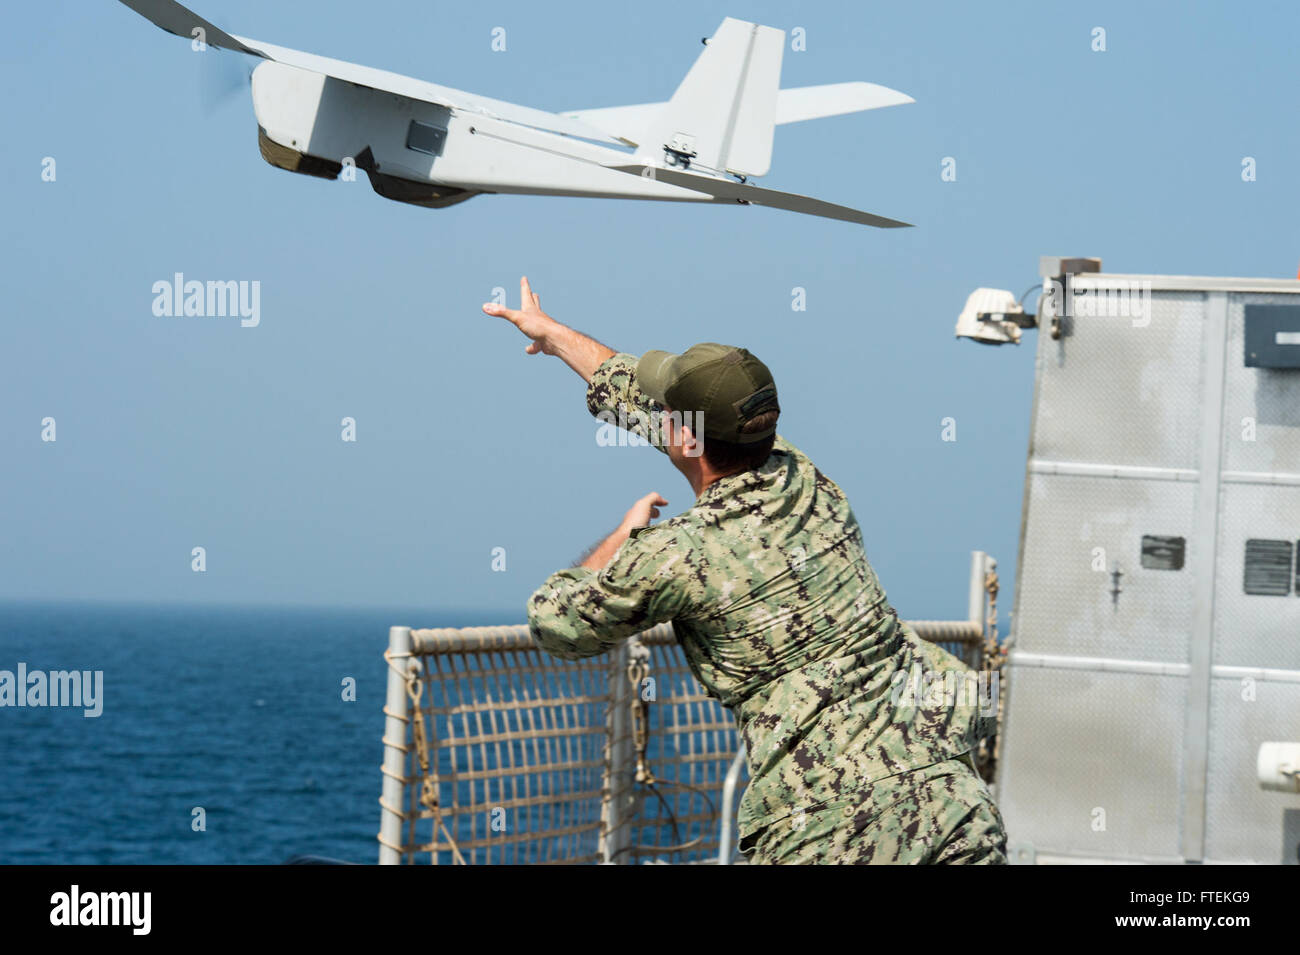 150126-N-JP249-028 ATLANTIC OCEAN (Jan. 26, 2015) Information Systems Technician 2nd Class Joshua Lesperance, from Spring Valley, Illinois, launches an RQ-20A Aqua Puma small unmanned aircraft system from the flight deck of the Military Sealift Command’s joint high-speed vessel USNS Spearhead (JHSV 1) Jan 26, 2015. Spearhead is on a scheduled deployment to the U.S. 6th Fleet area of operations in support of the international collaborative capacity-building program Africa Partnership Station. (U.S. Navy photo by Mass Communication Specialist 2nd Class Kenan O’Connor/Released) Stock Photo